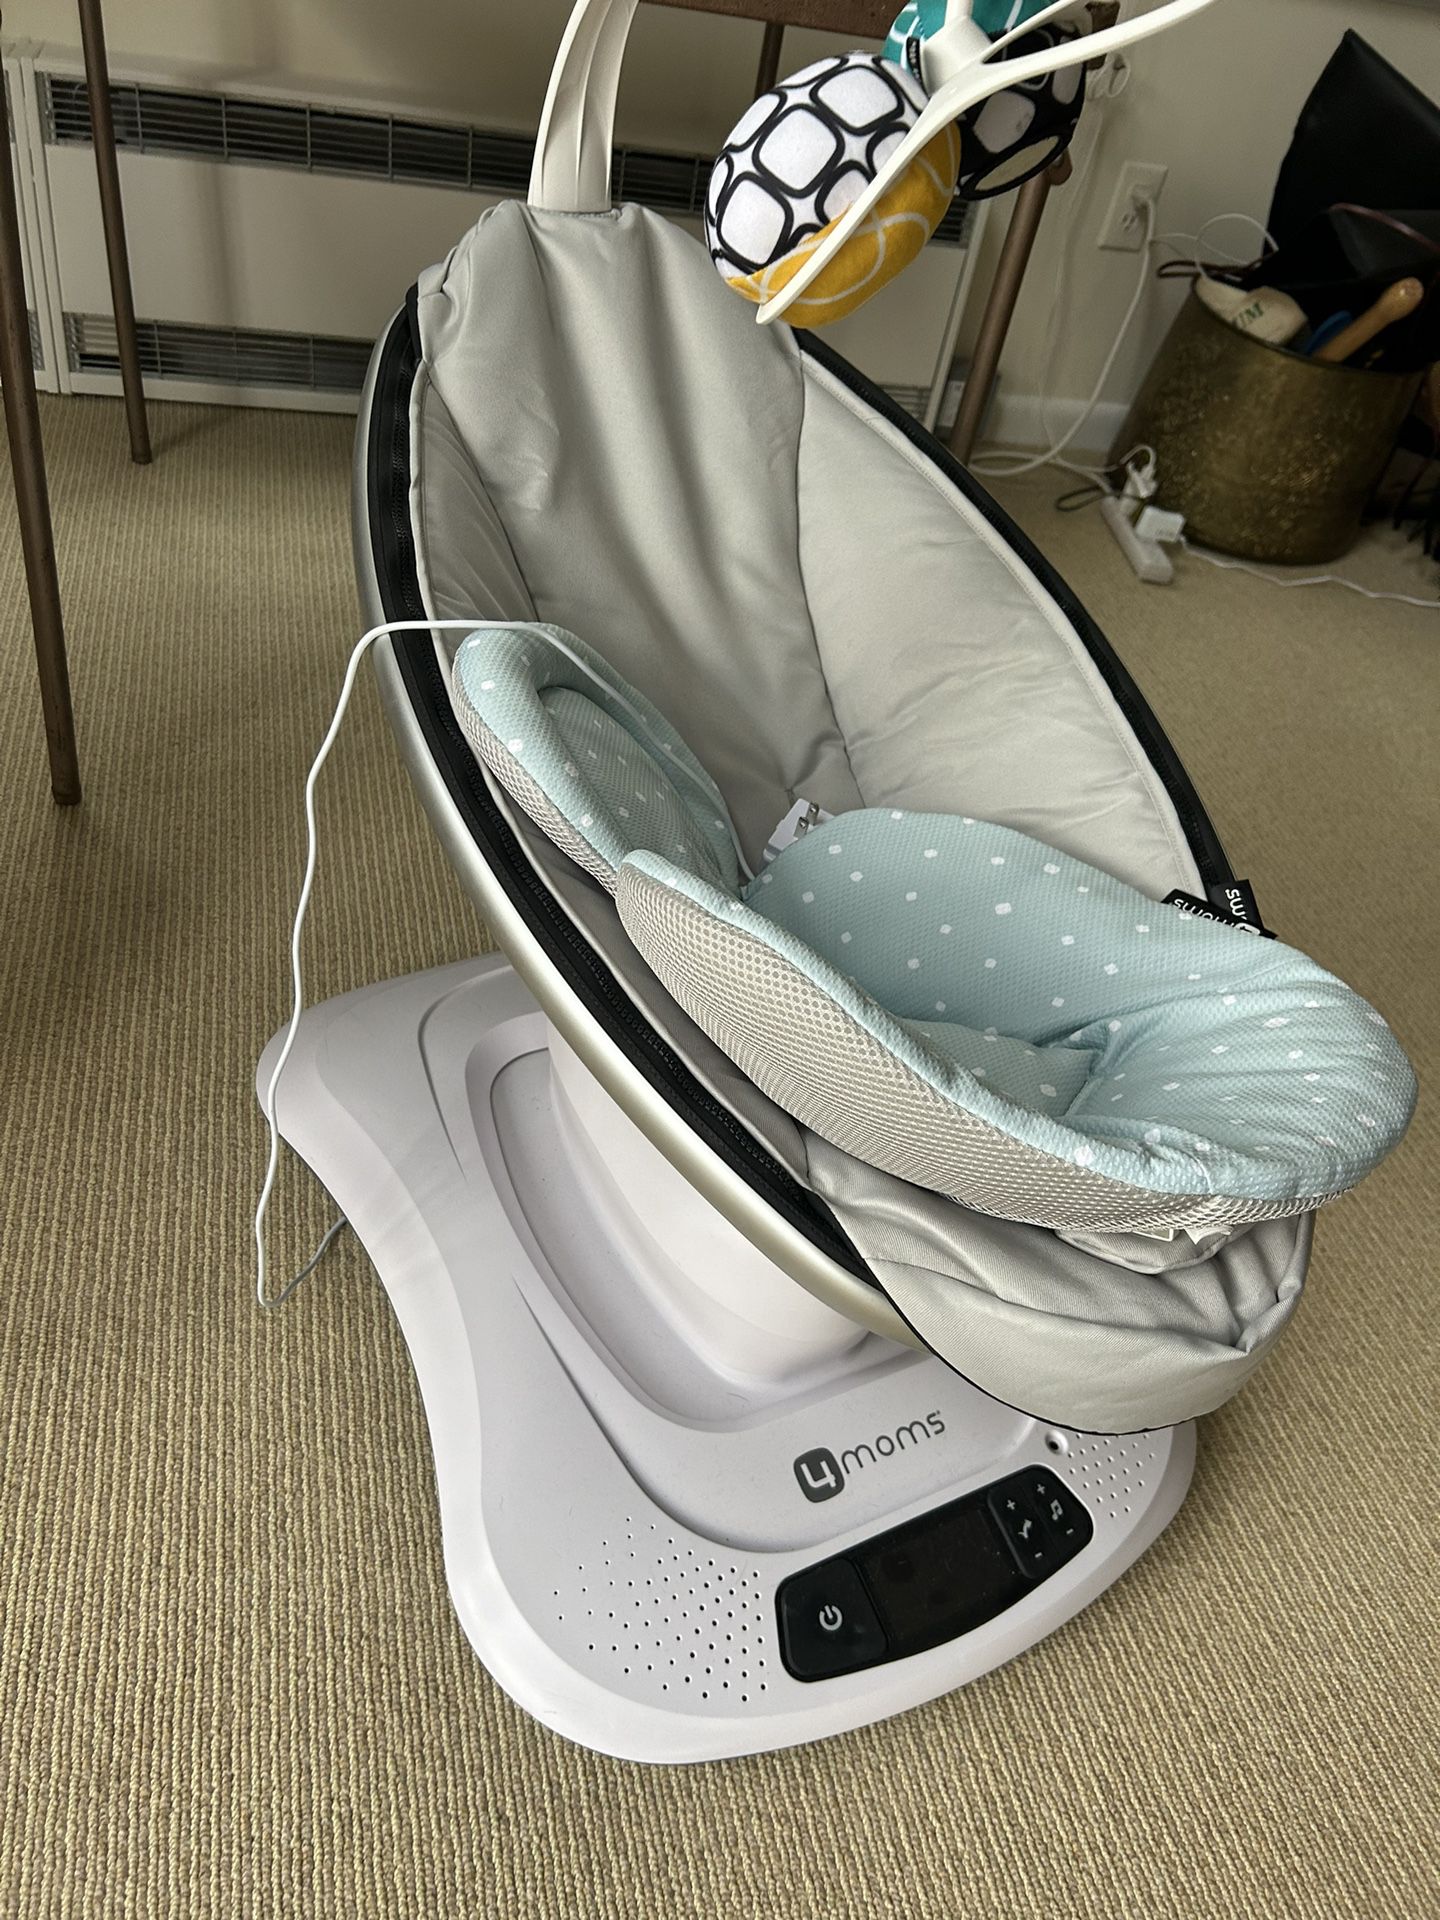 4 Moms Electric baby Swing